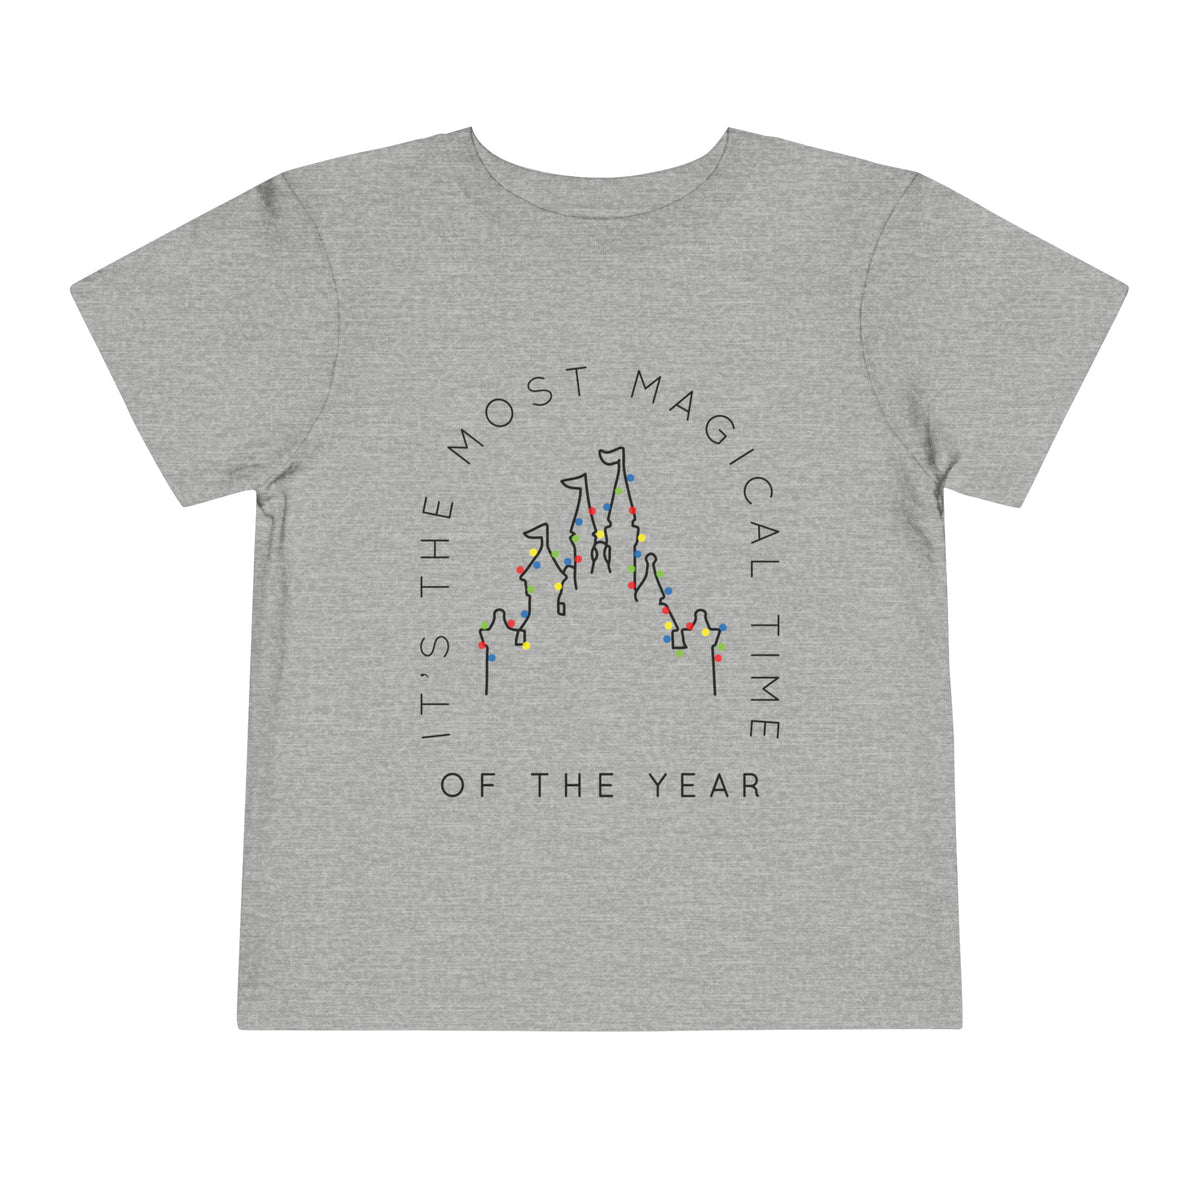 Most Magical Time Of The Year Bella Canvas Toddler Short Sleeve Tee